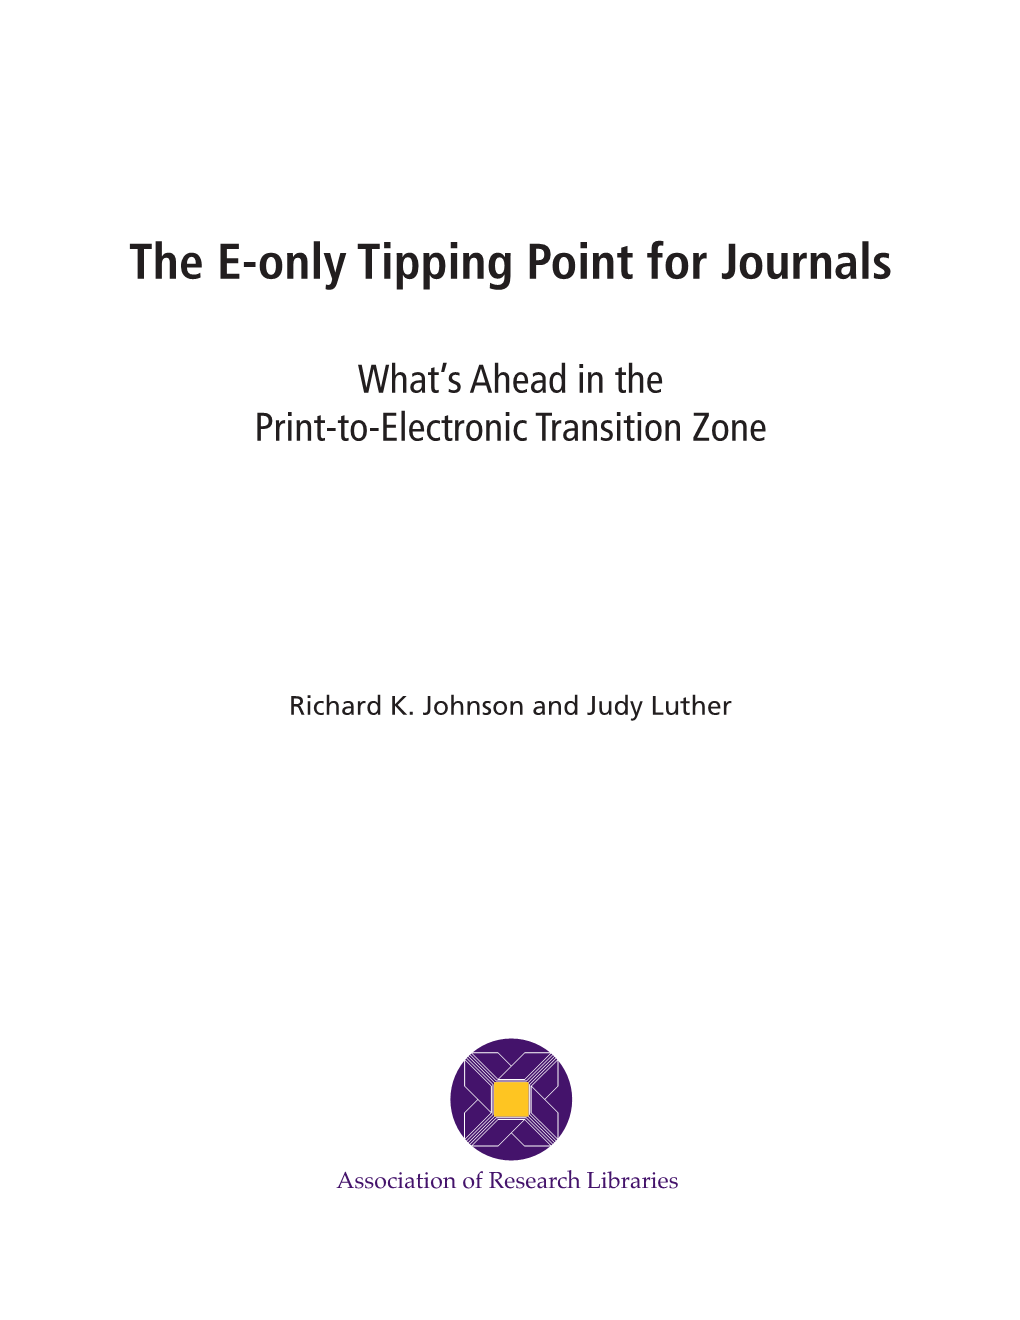 The E-Only Tipping Point for Journals